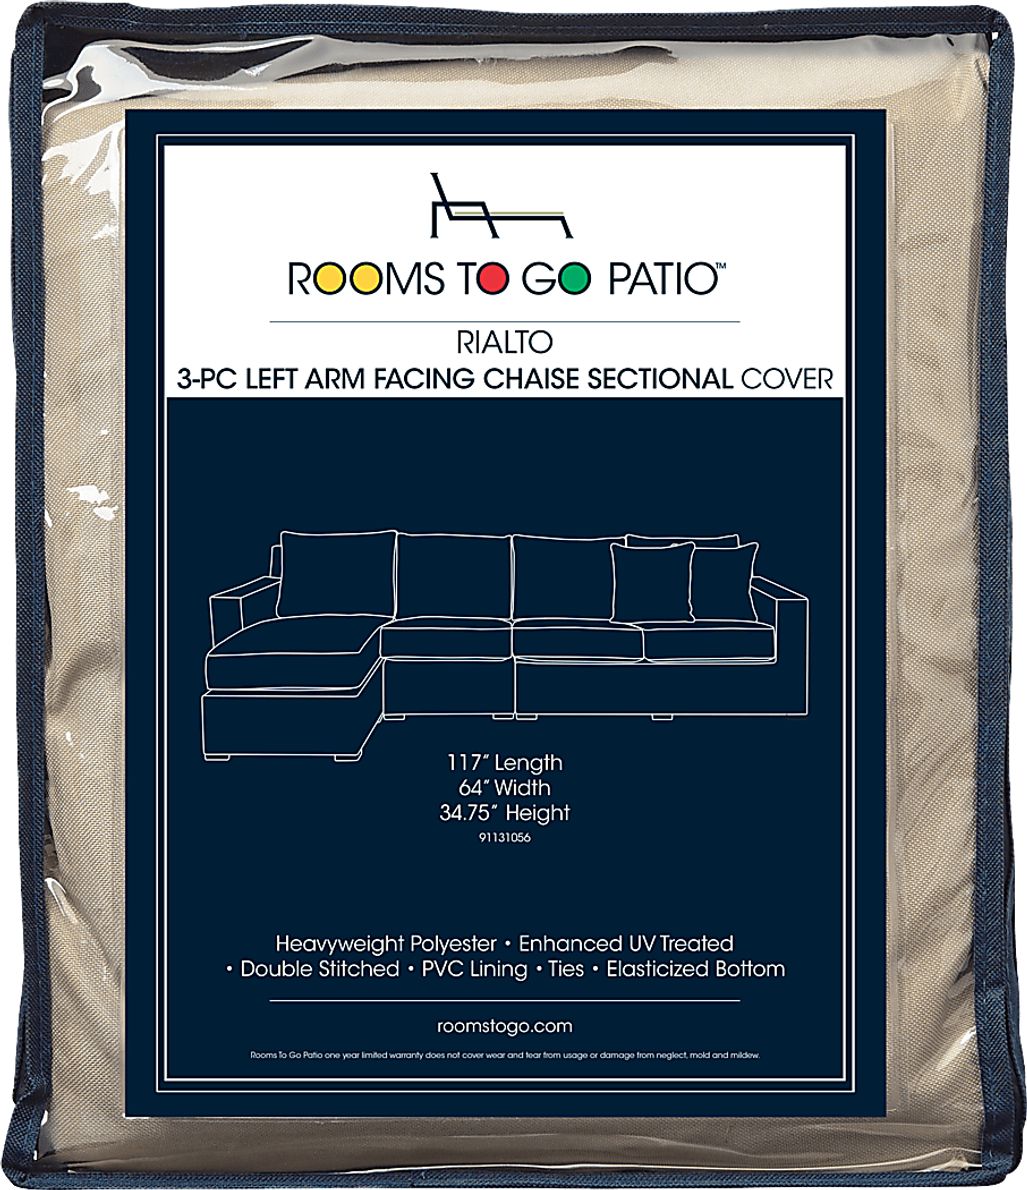 Rialto 3 Pc Patio Left Arm Facing Chaise Sectional Cover